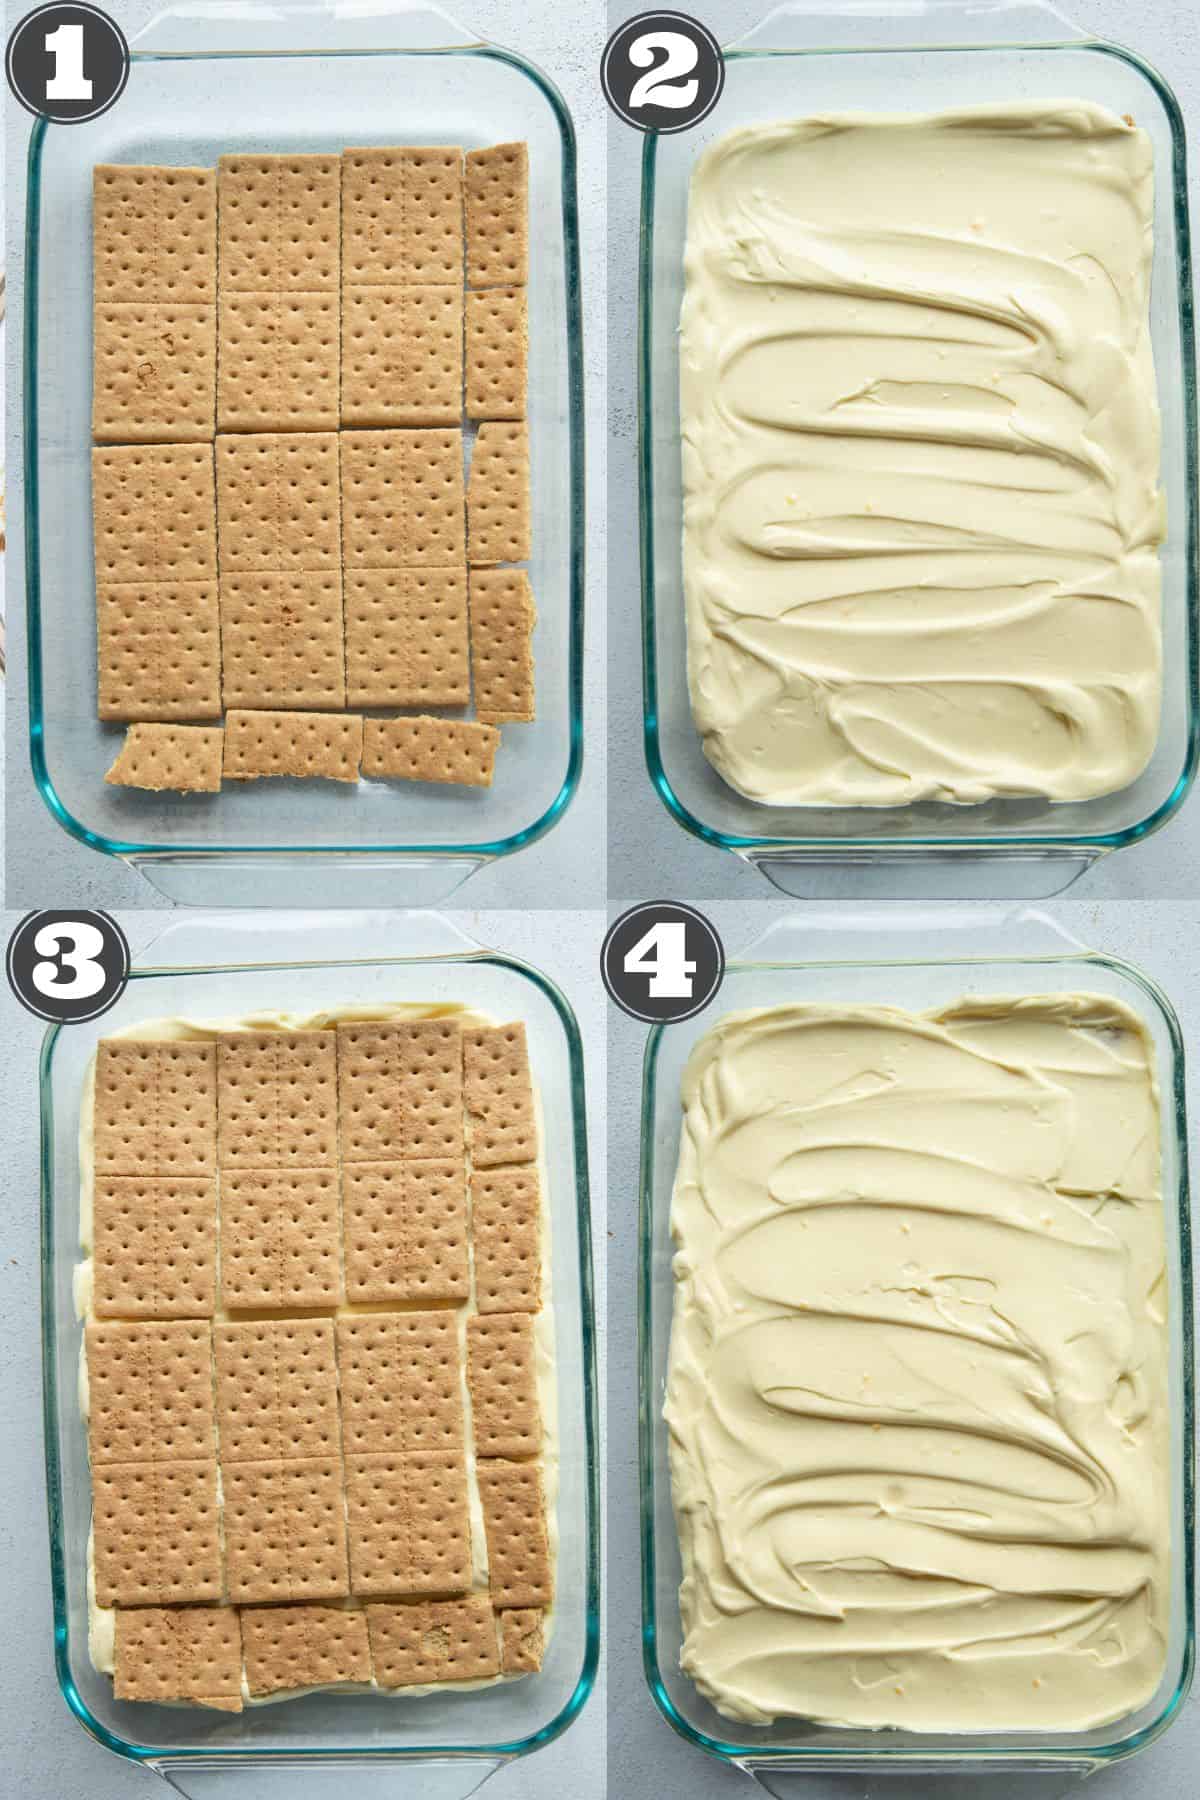 four steps to making eclair cake, showing various stages of the cake with graham crackers and vanilla pudding.